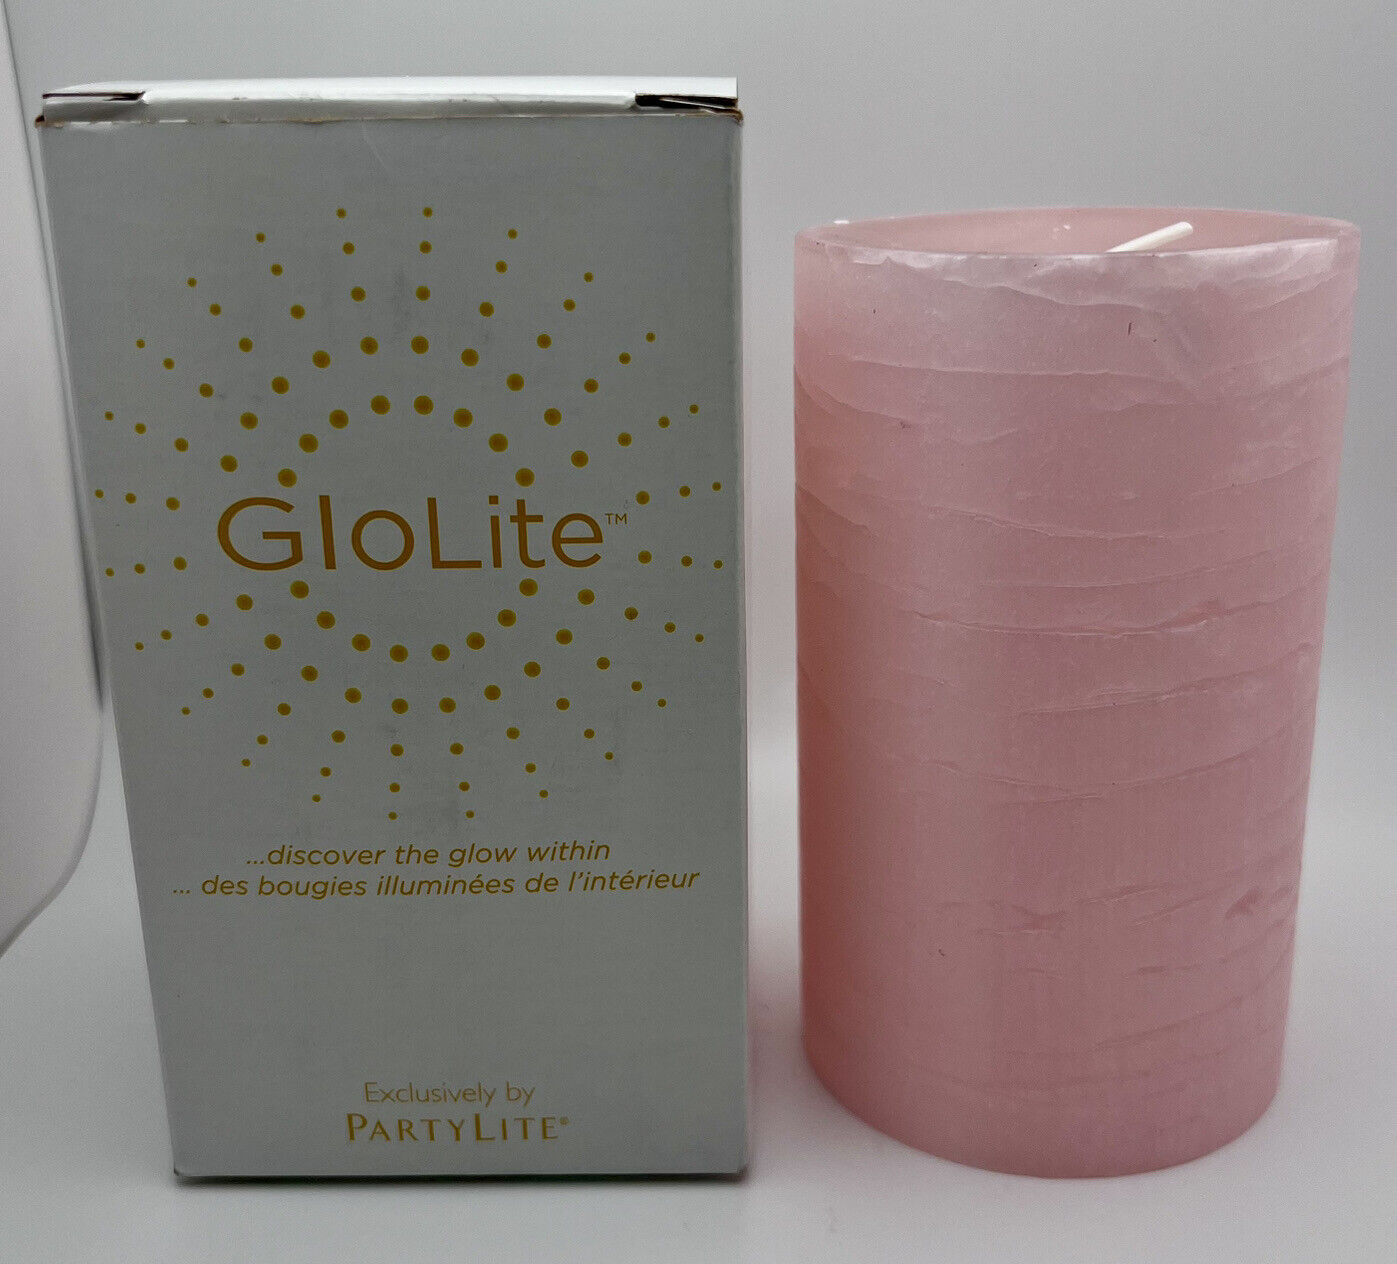 Partylite GloLite Apple Blossom Piller Candle 3x5 L35277 Pink NEW IN BOX